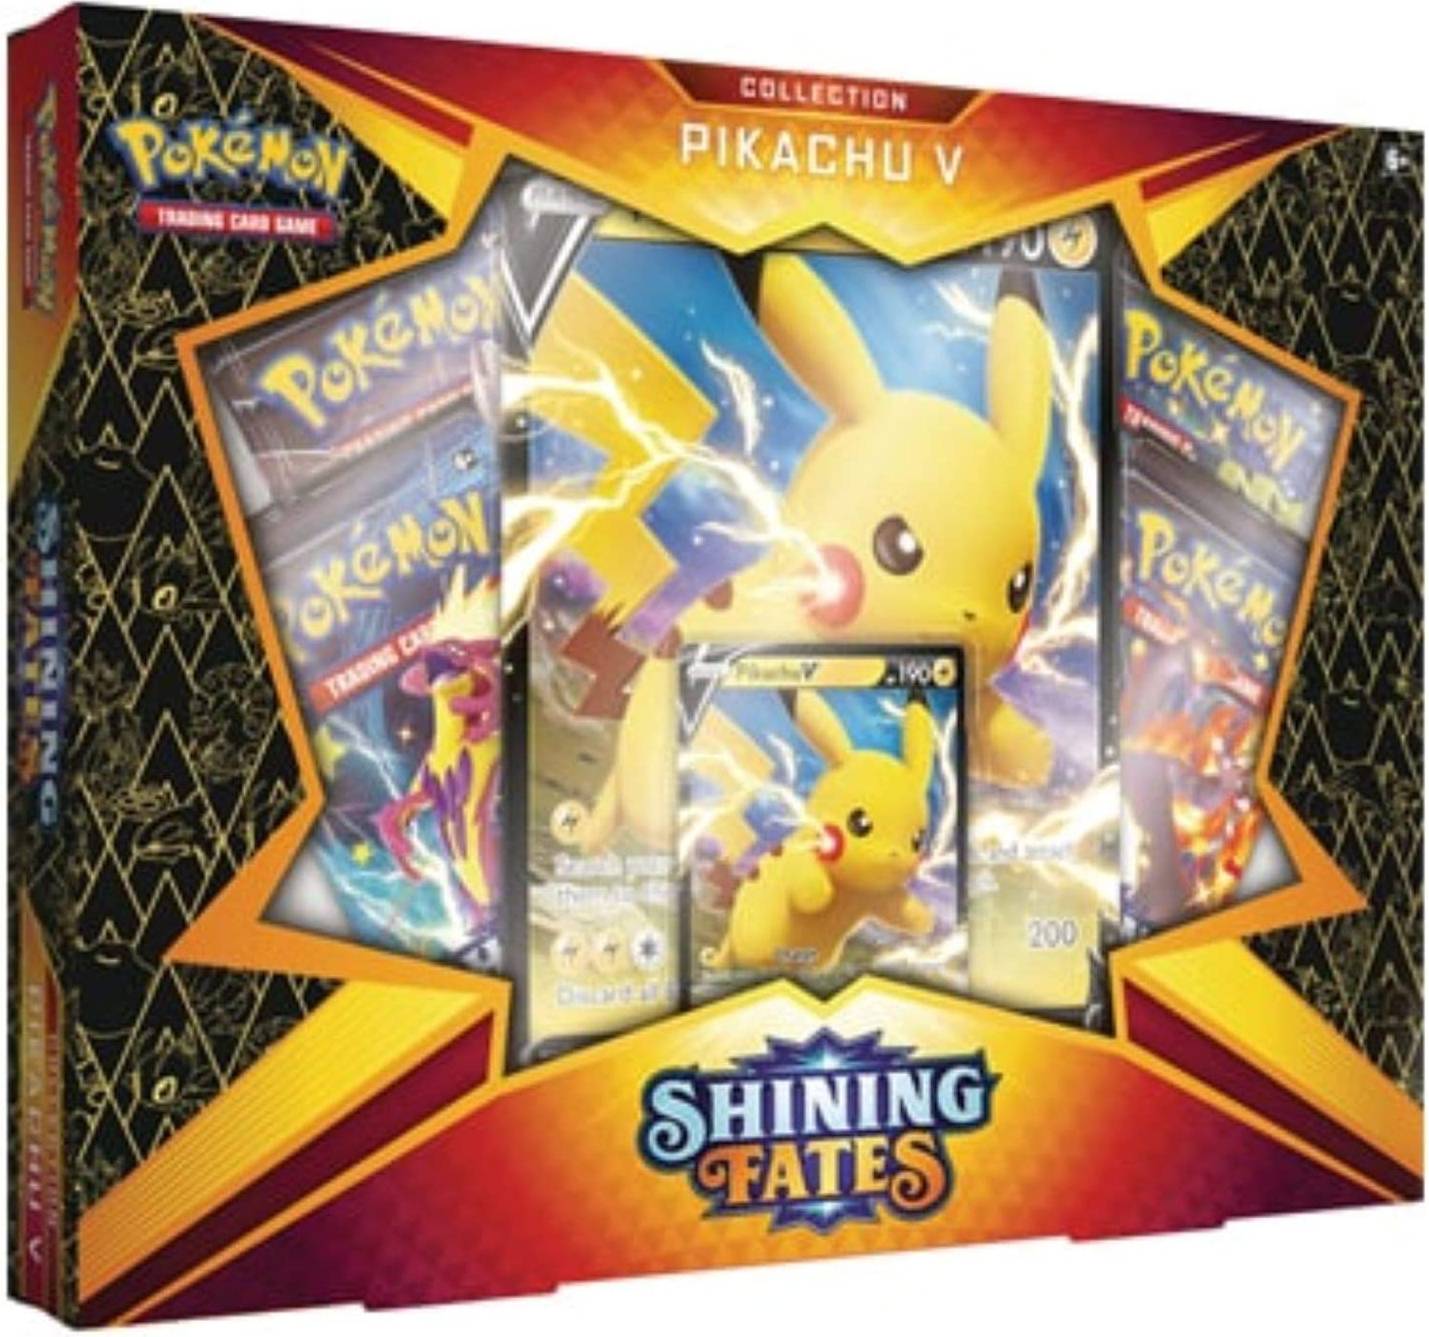 1 PACK Pokémon Shining Fates Factory Sealed Booster Pack Mint Unweighed Shiny 